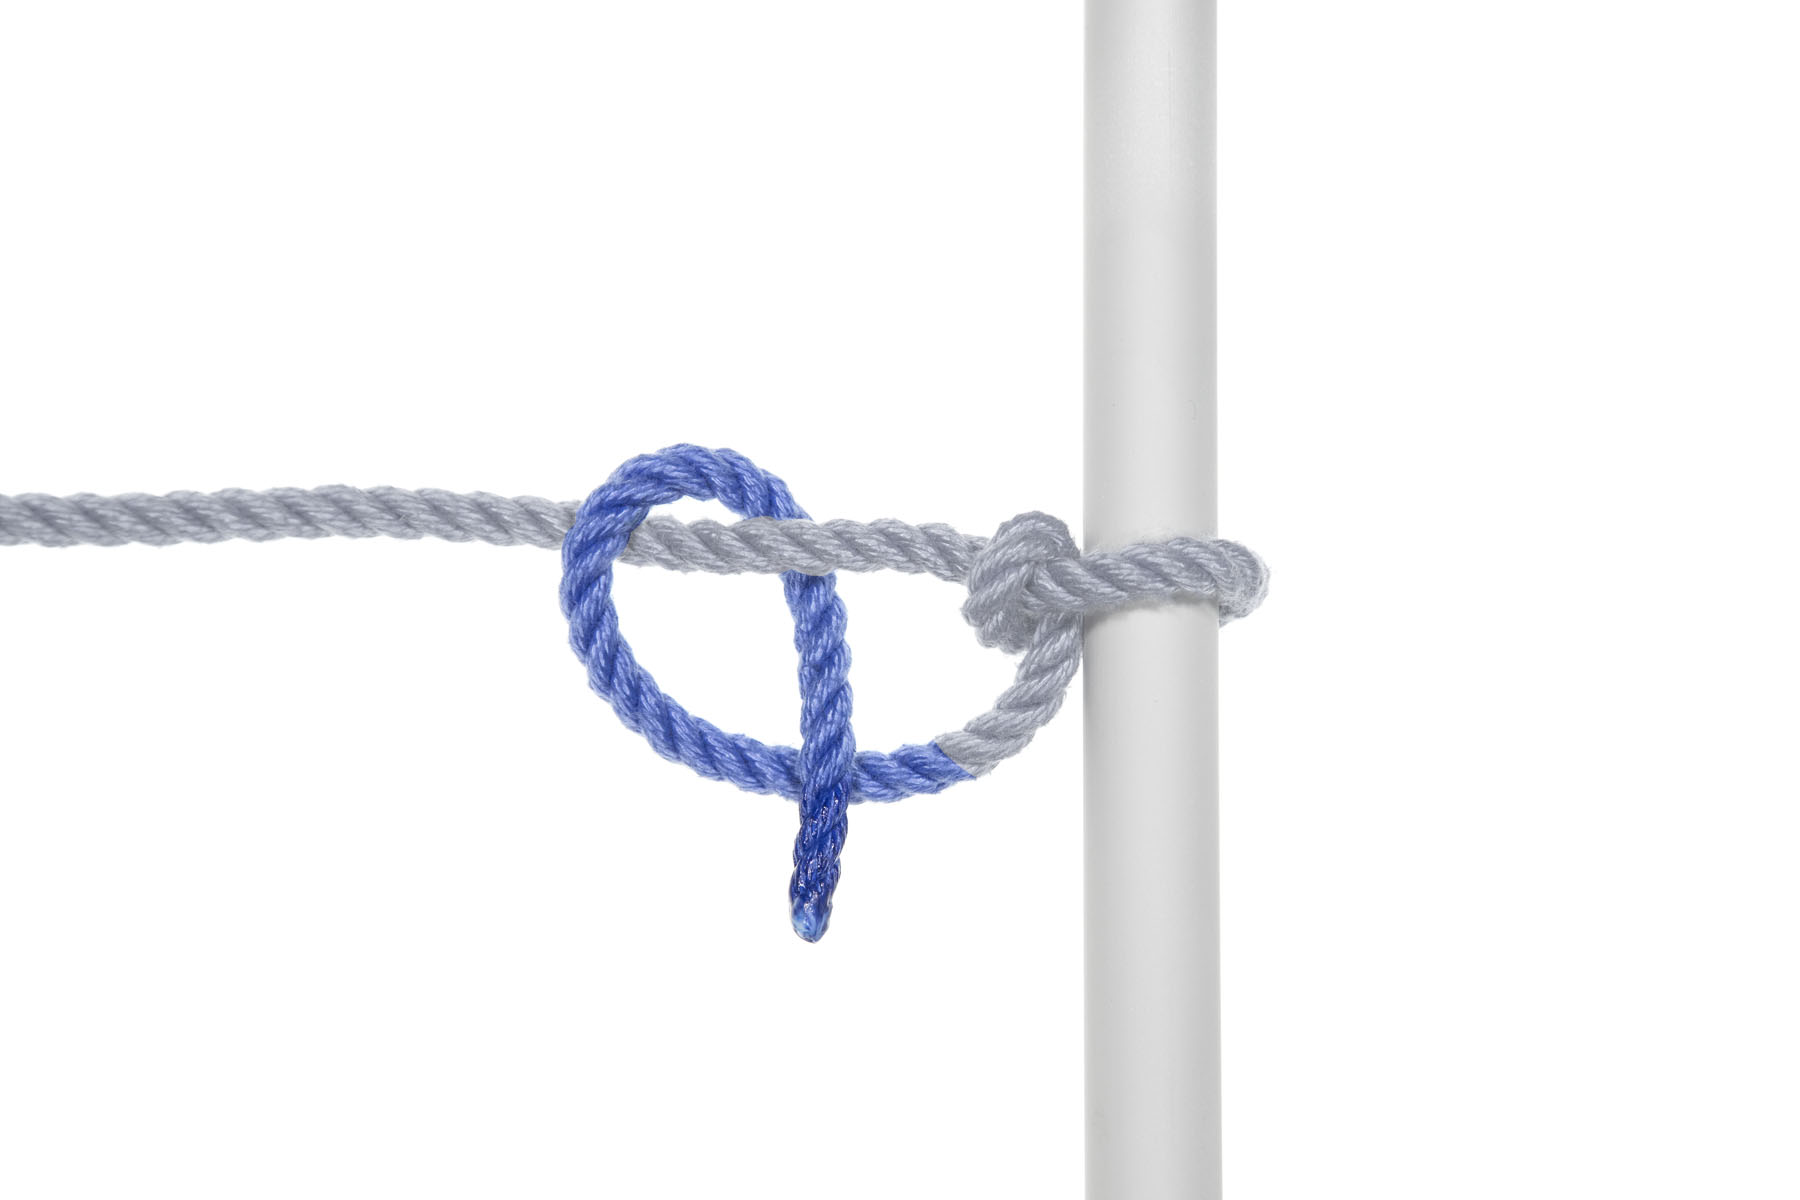 The half hitch has been pulled snug against the pole. The end of the rope crosses over the standing part, under the standing part, and over itself, to make a second half hitch.